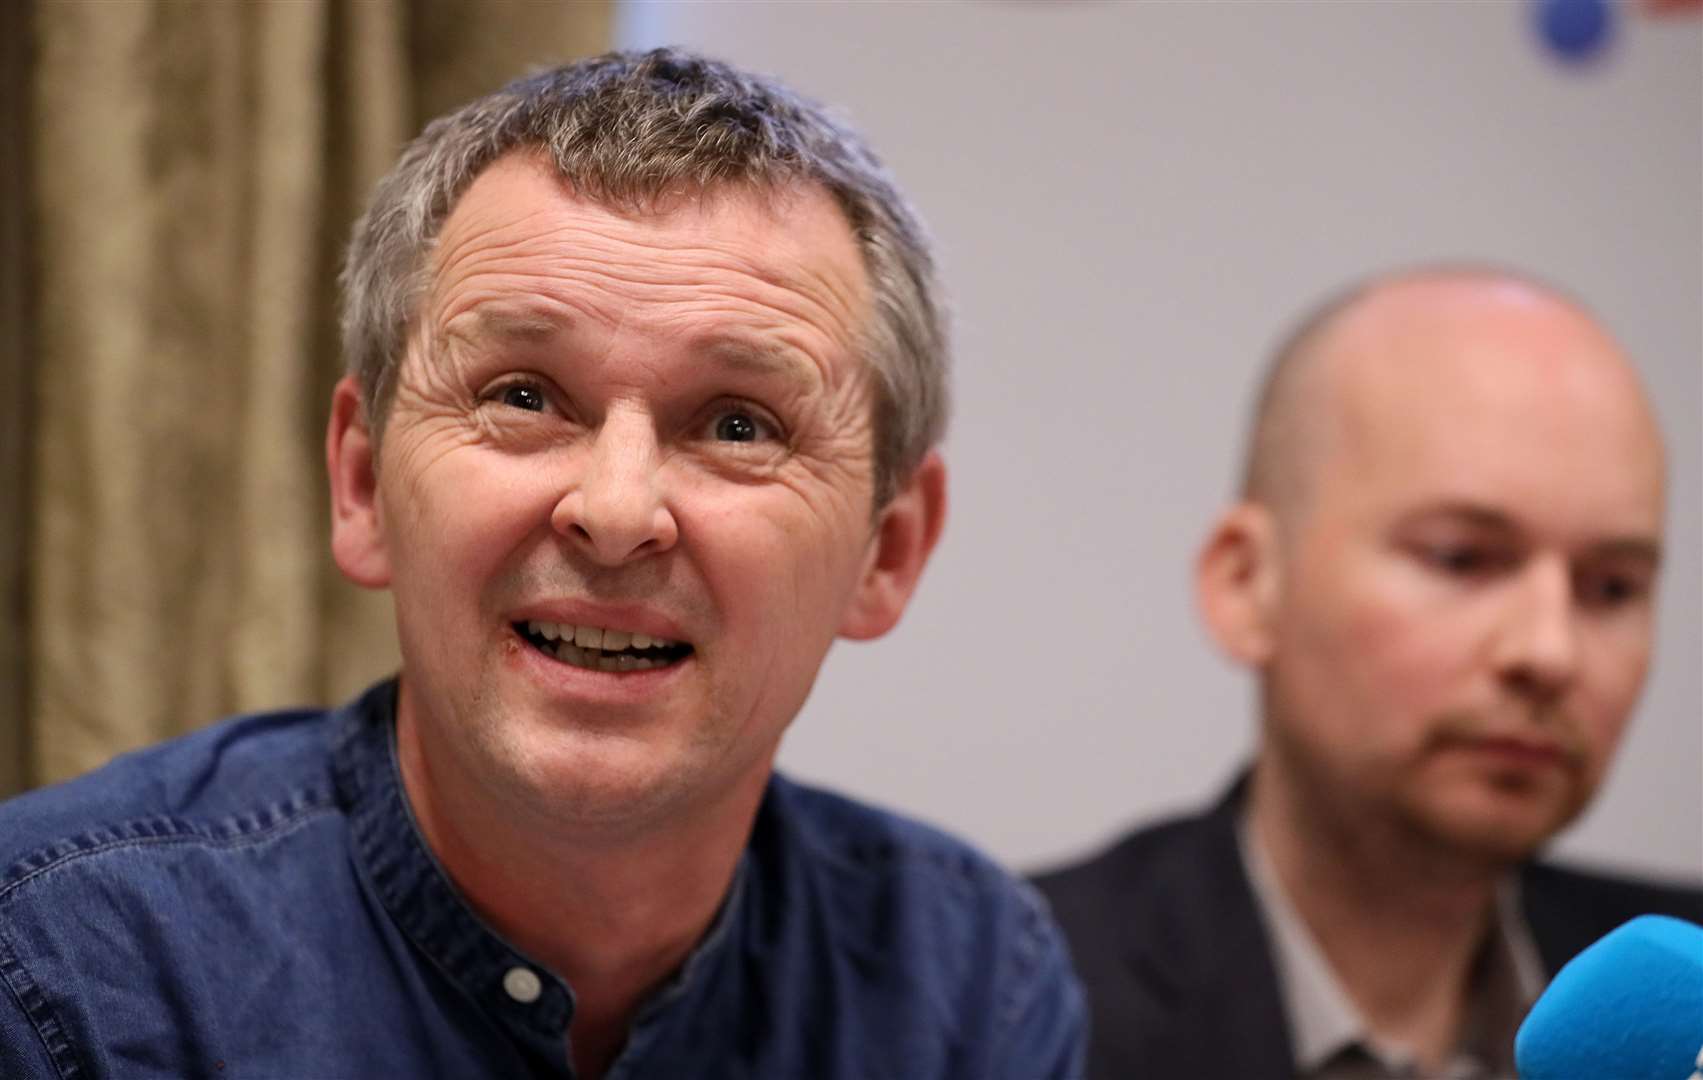 People Before Profit’s Richard Boyd Barrett (left) and Paul Murphy called for the ambassador to be expelled (PA)